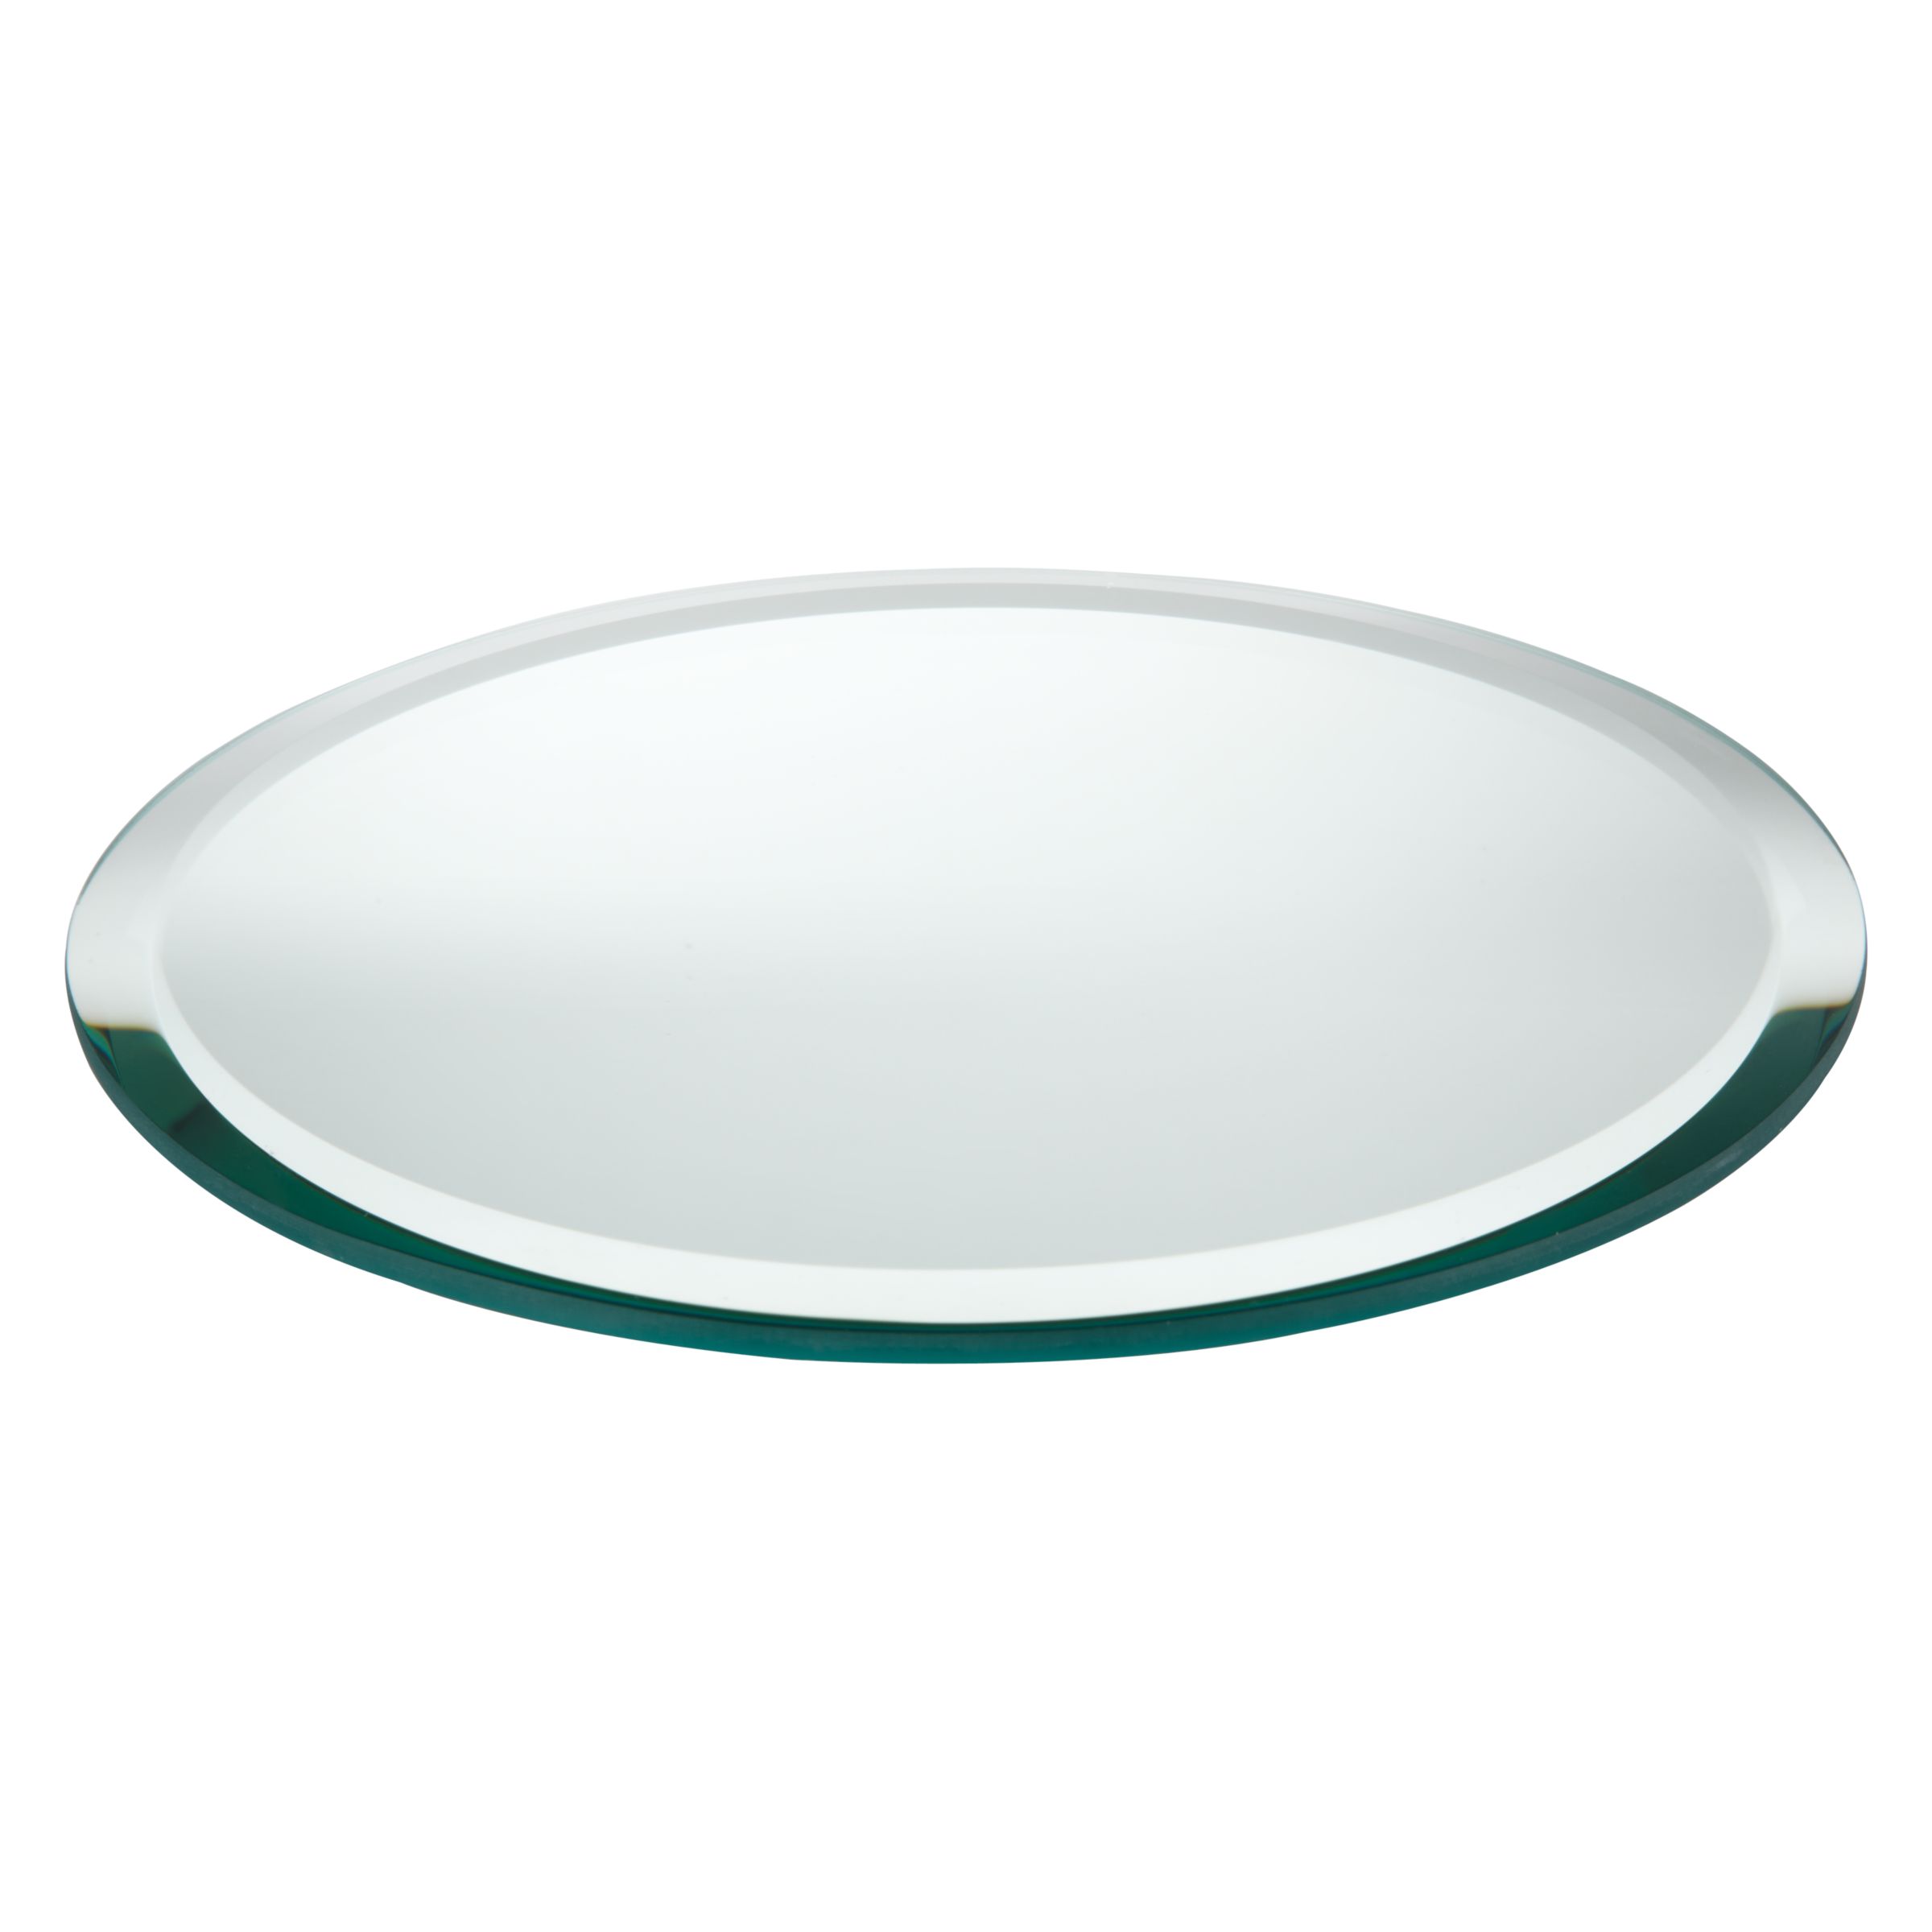 John Lewis Mirror Candle Plate 110157